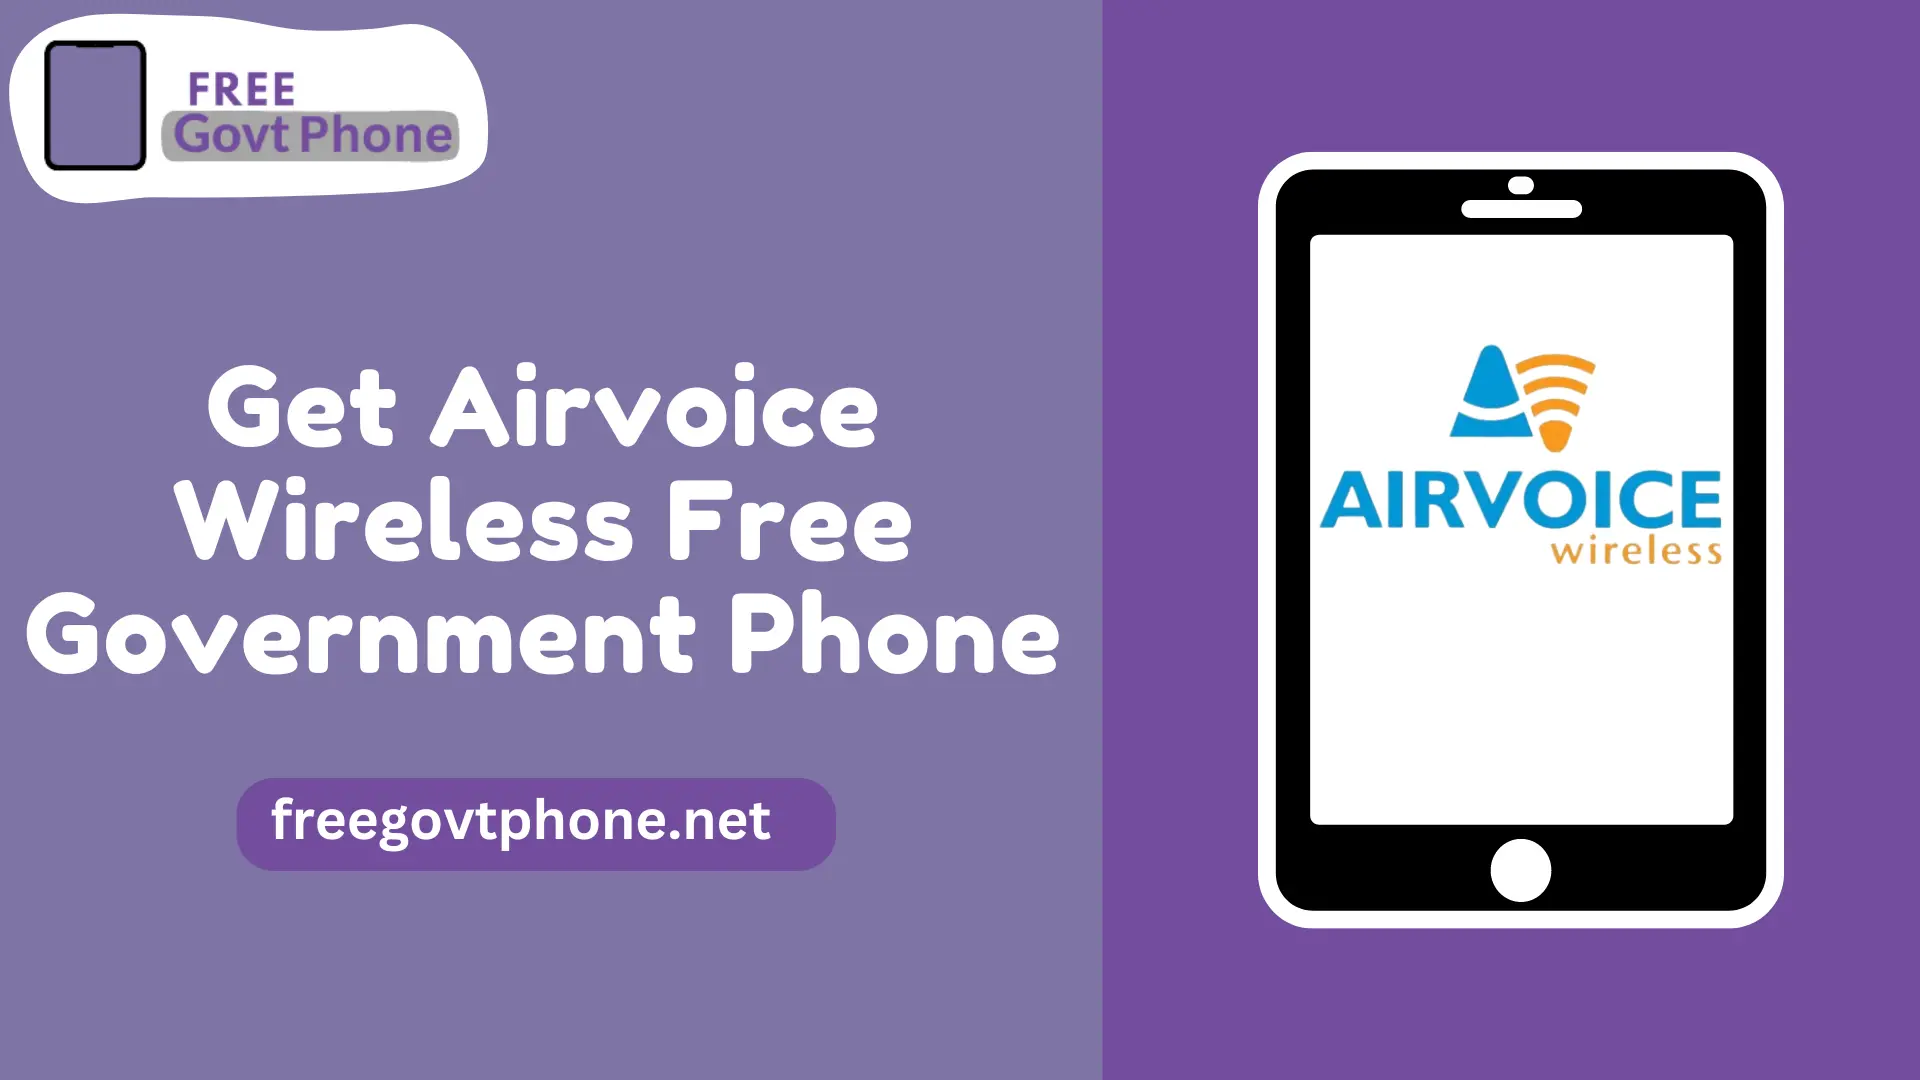 How to Get Airvoice Wireless Free Government Phone